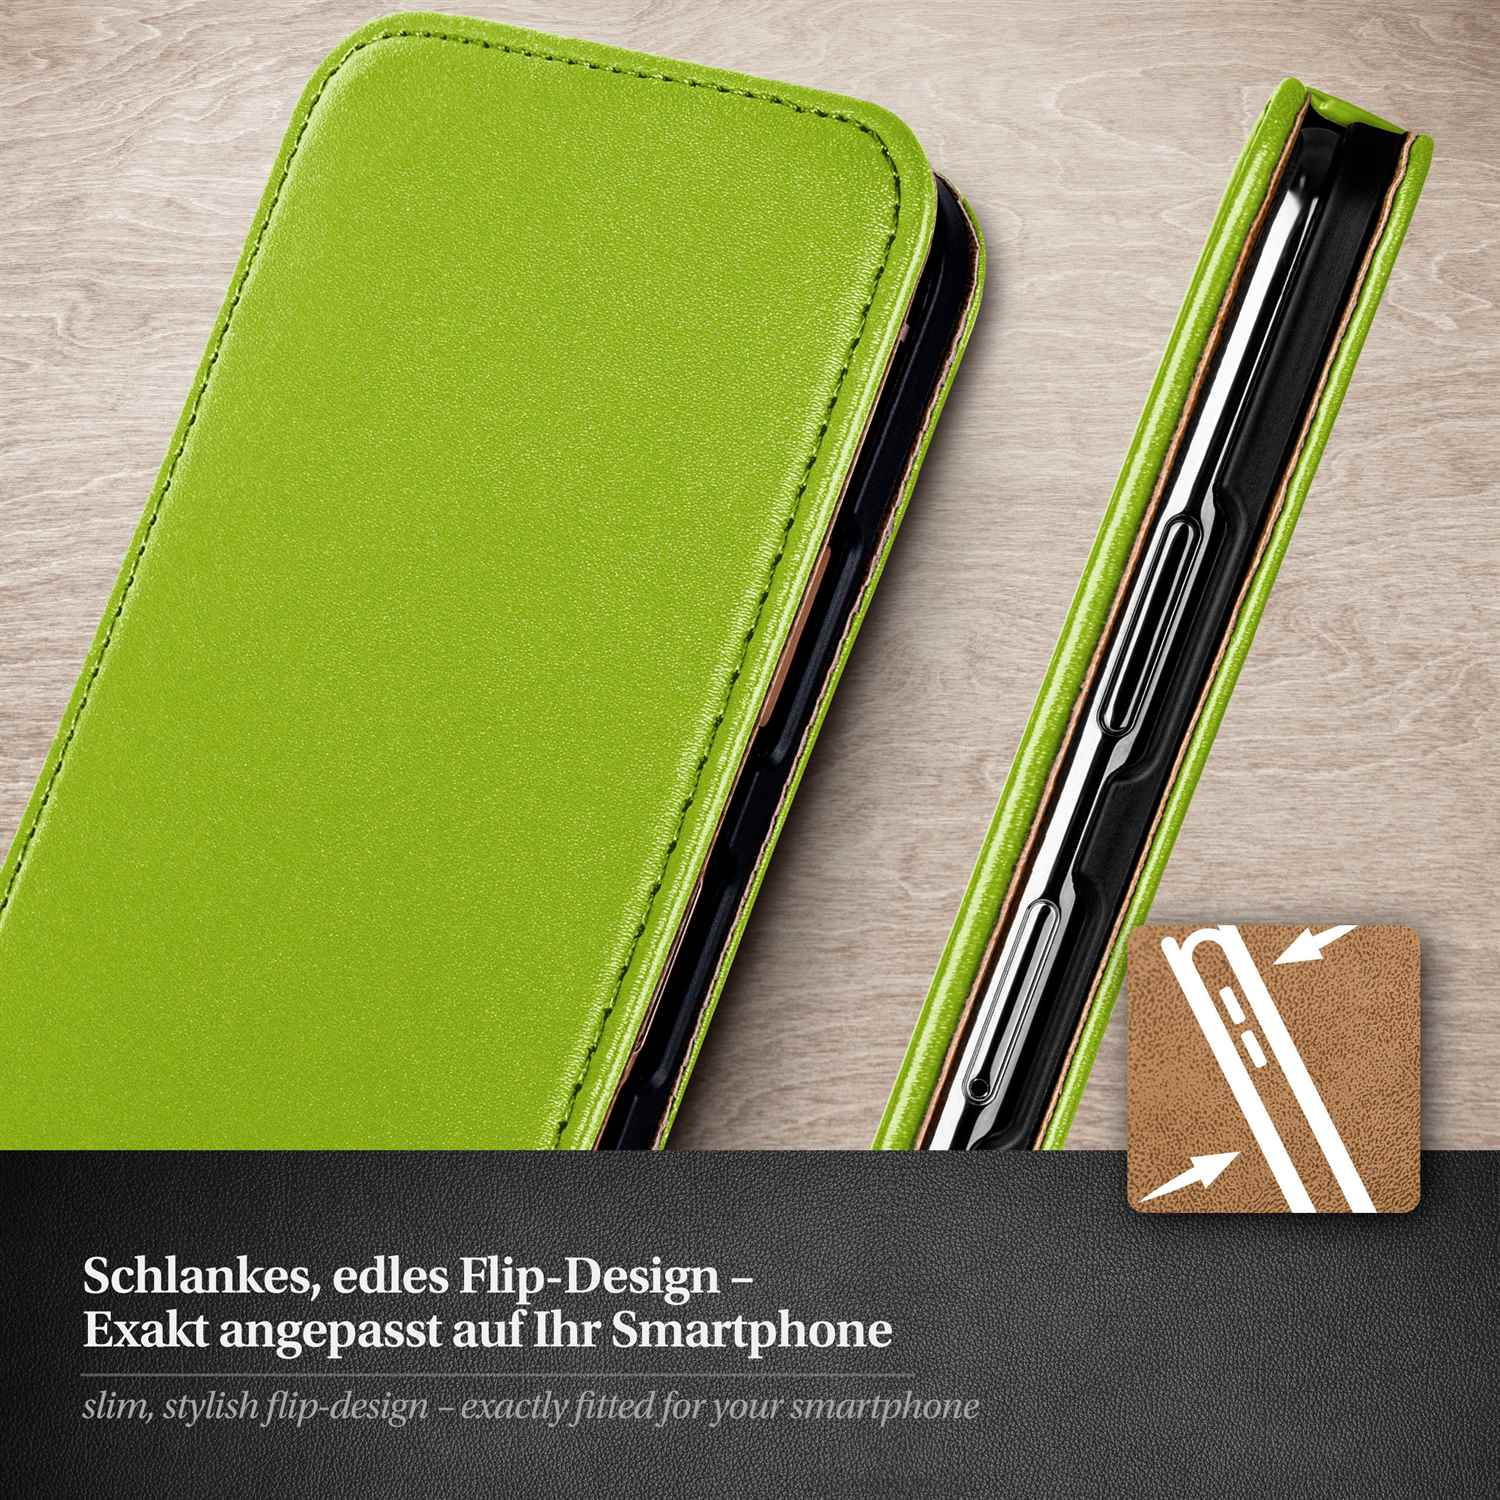 Flip Cover, Sony, Case, Z1, Lime-Green MOEX Flip Xperia